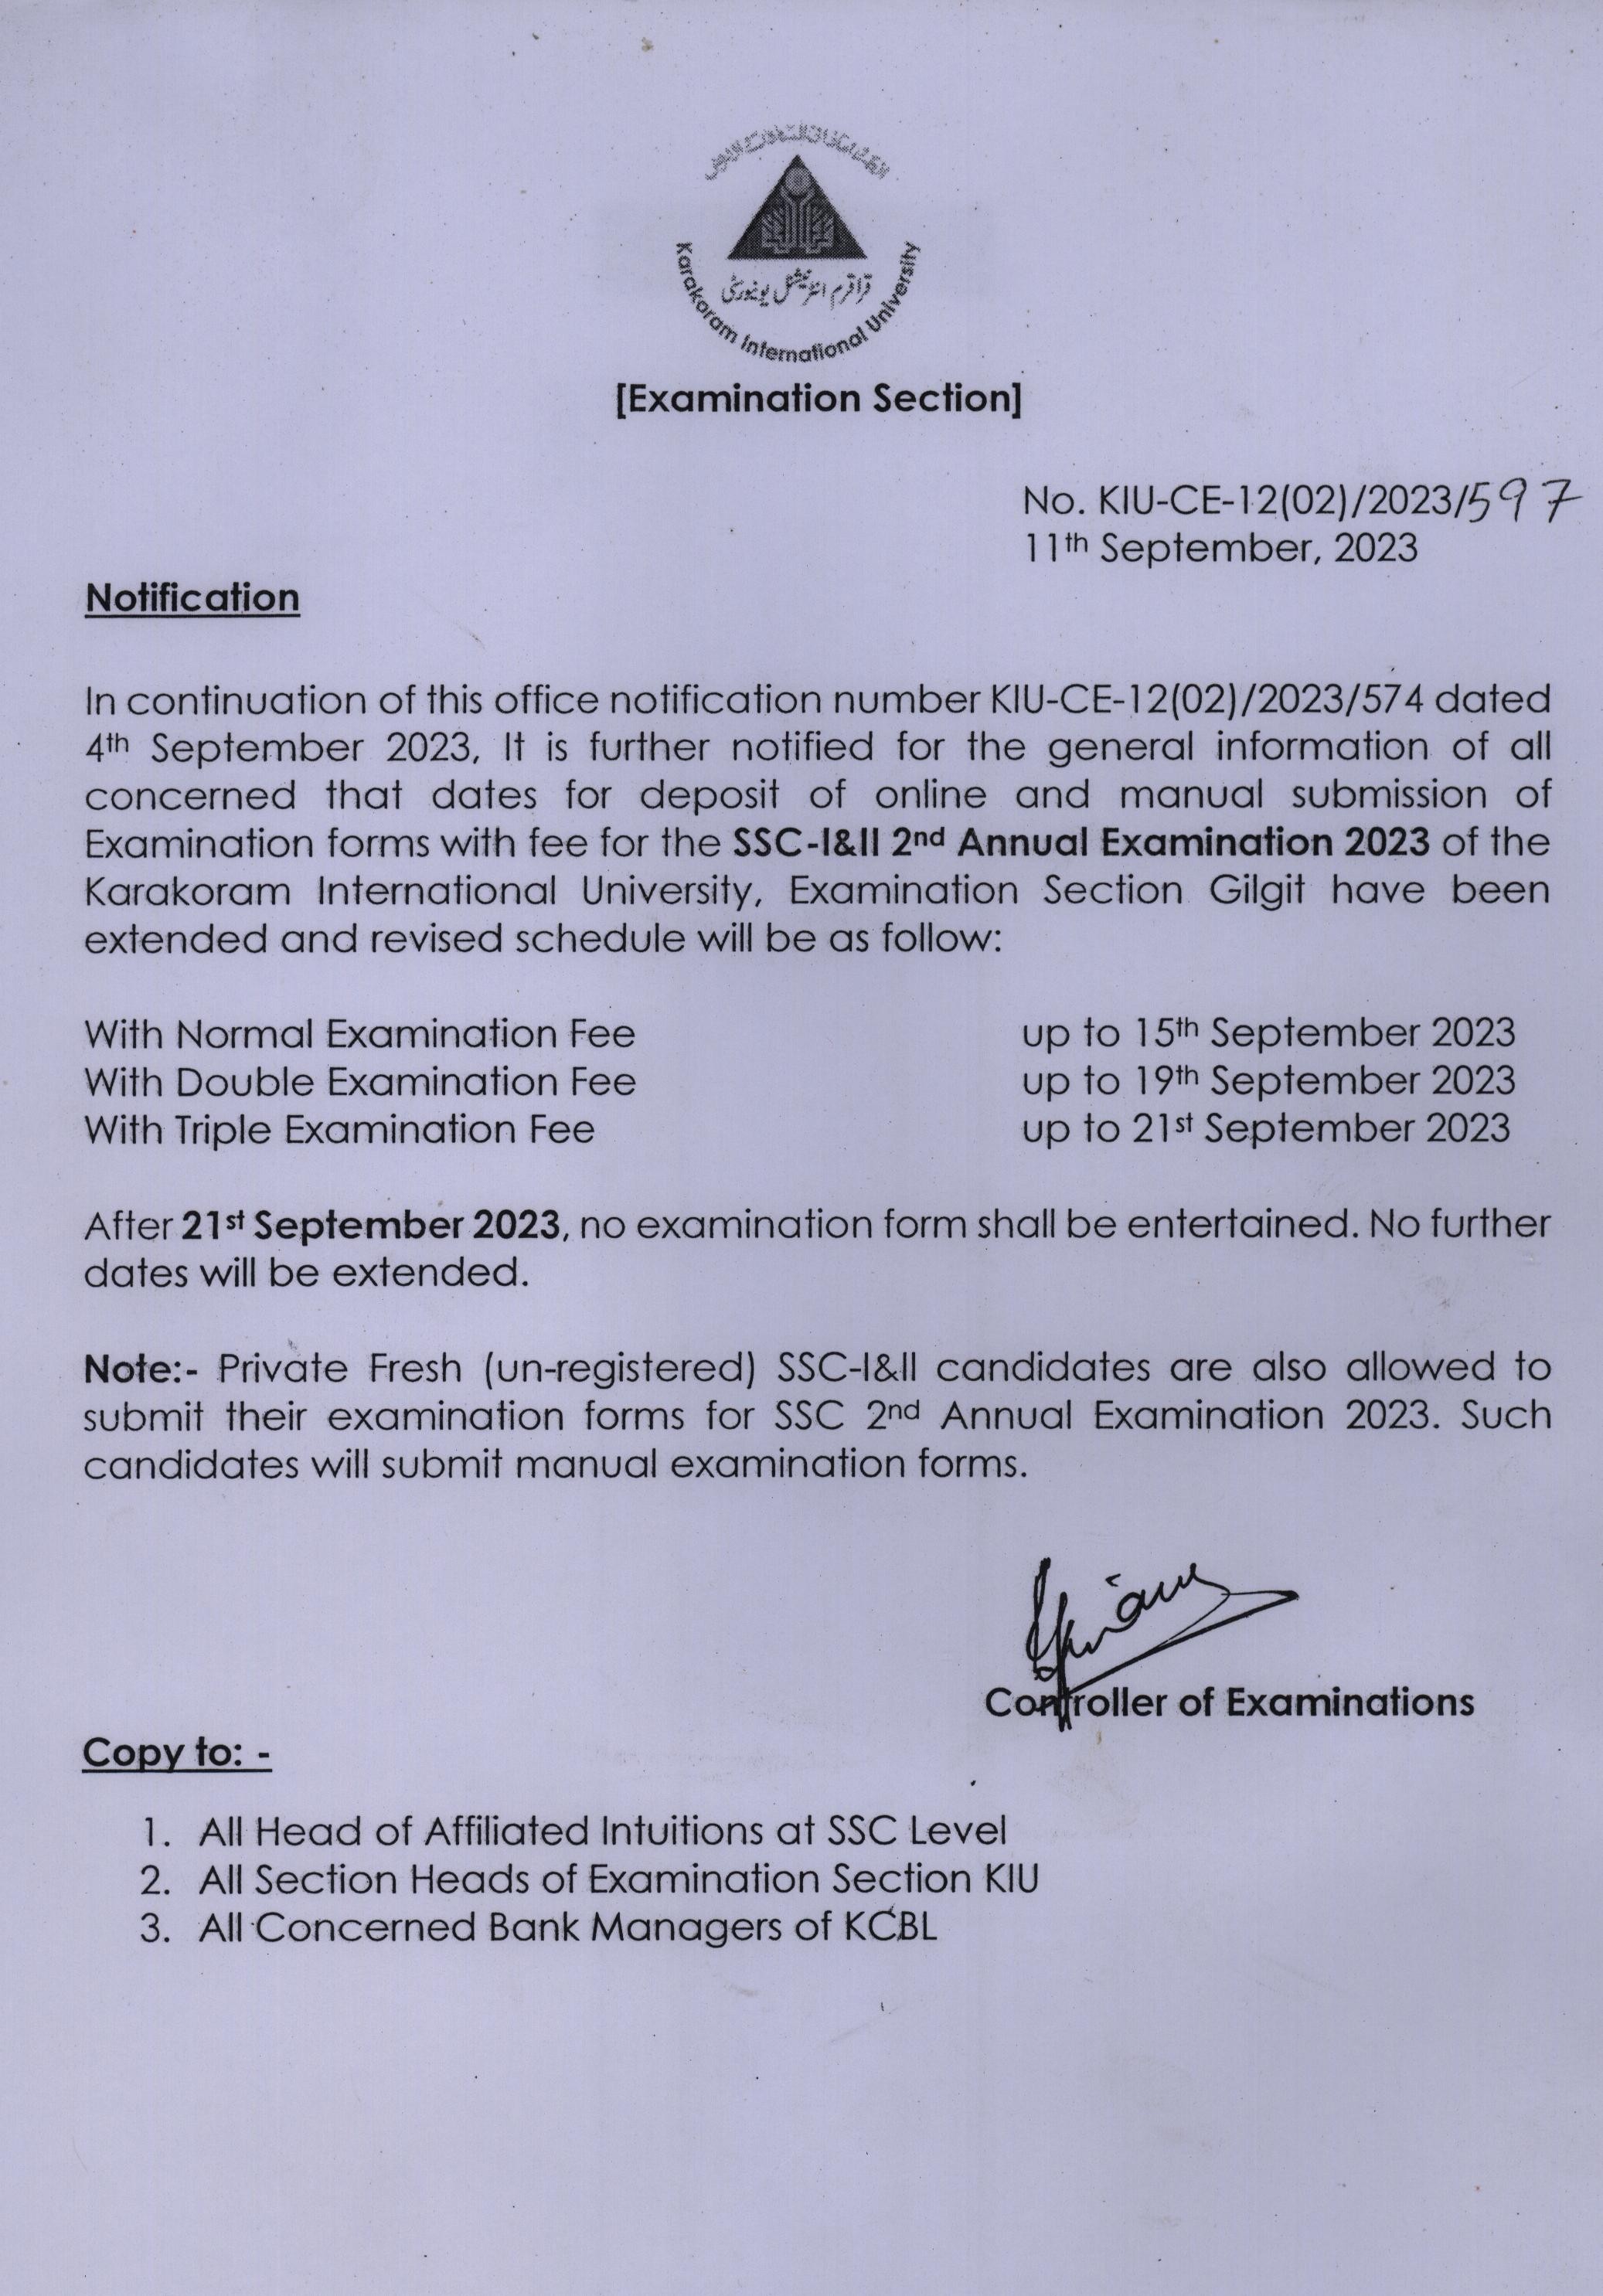 	SSC Second Annual Examination Exam Form/Fee extension